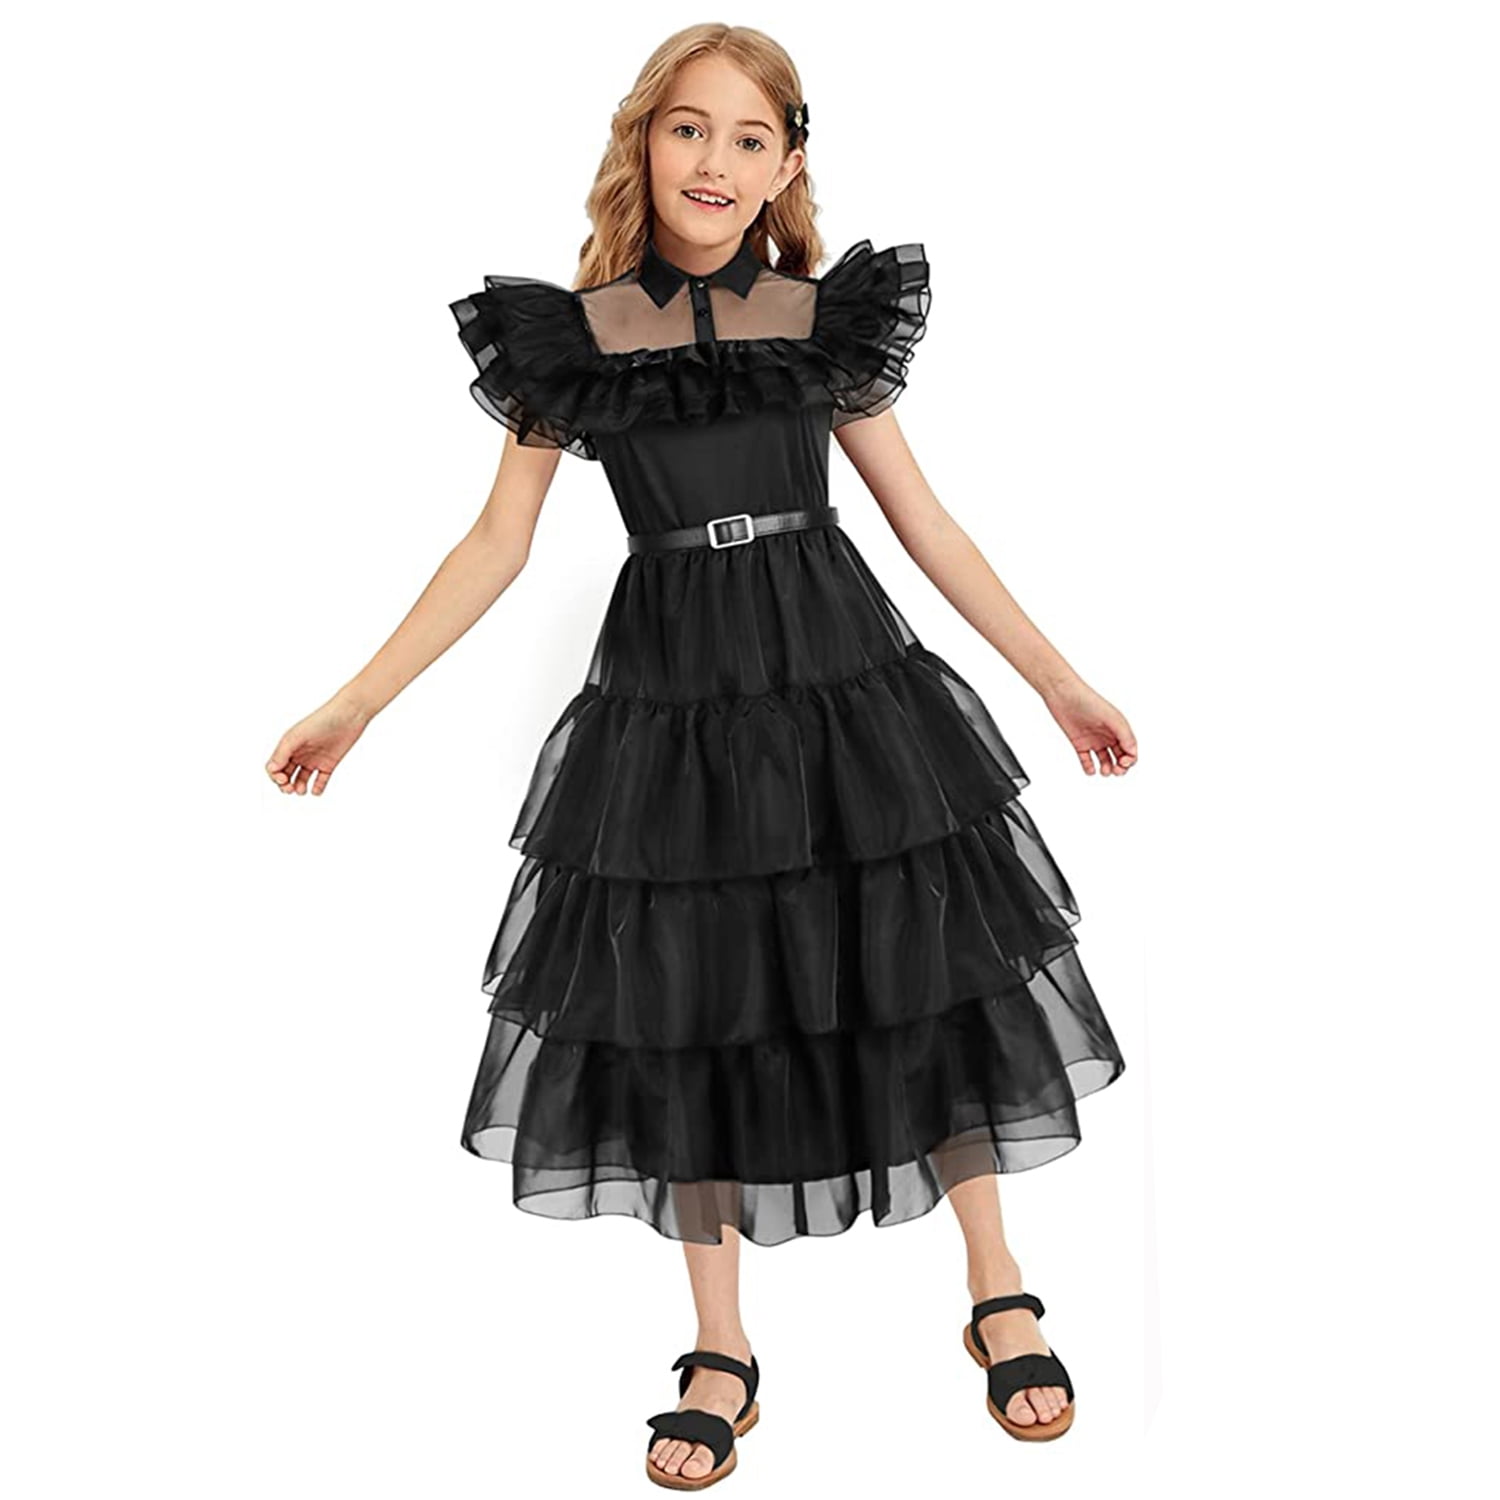 KAWELL Wednesday Addams Costume Dress for Girls Wednesday Cosplay Costume Halloween Outfit for 5-12 Years